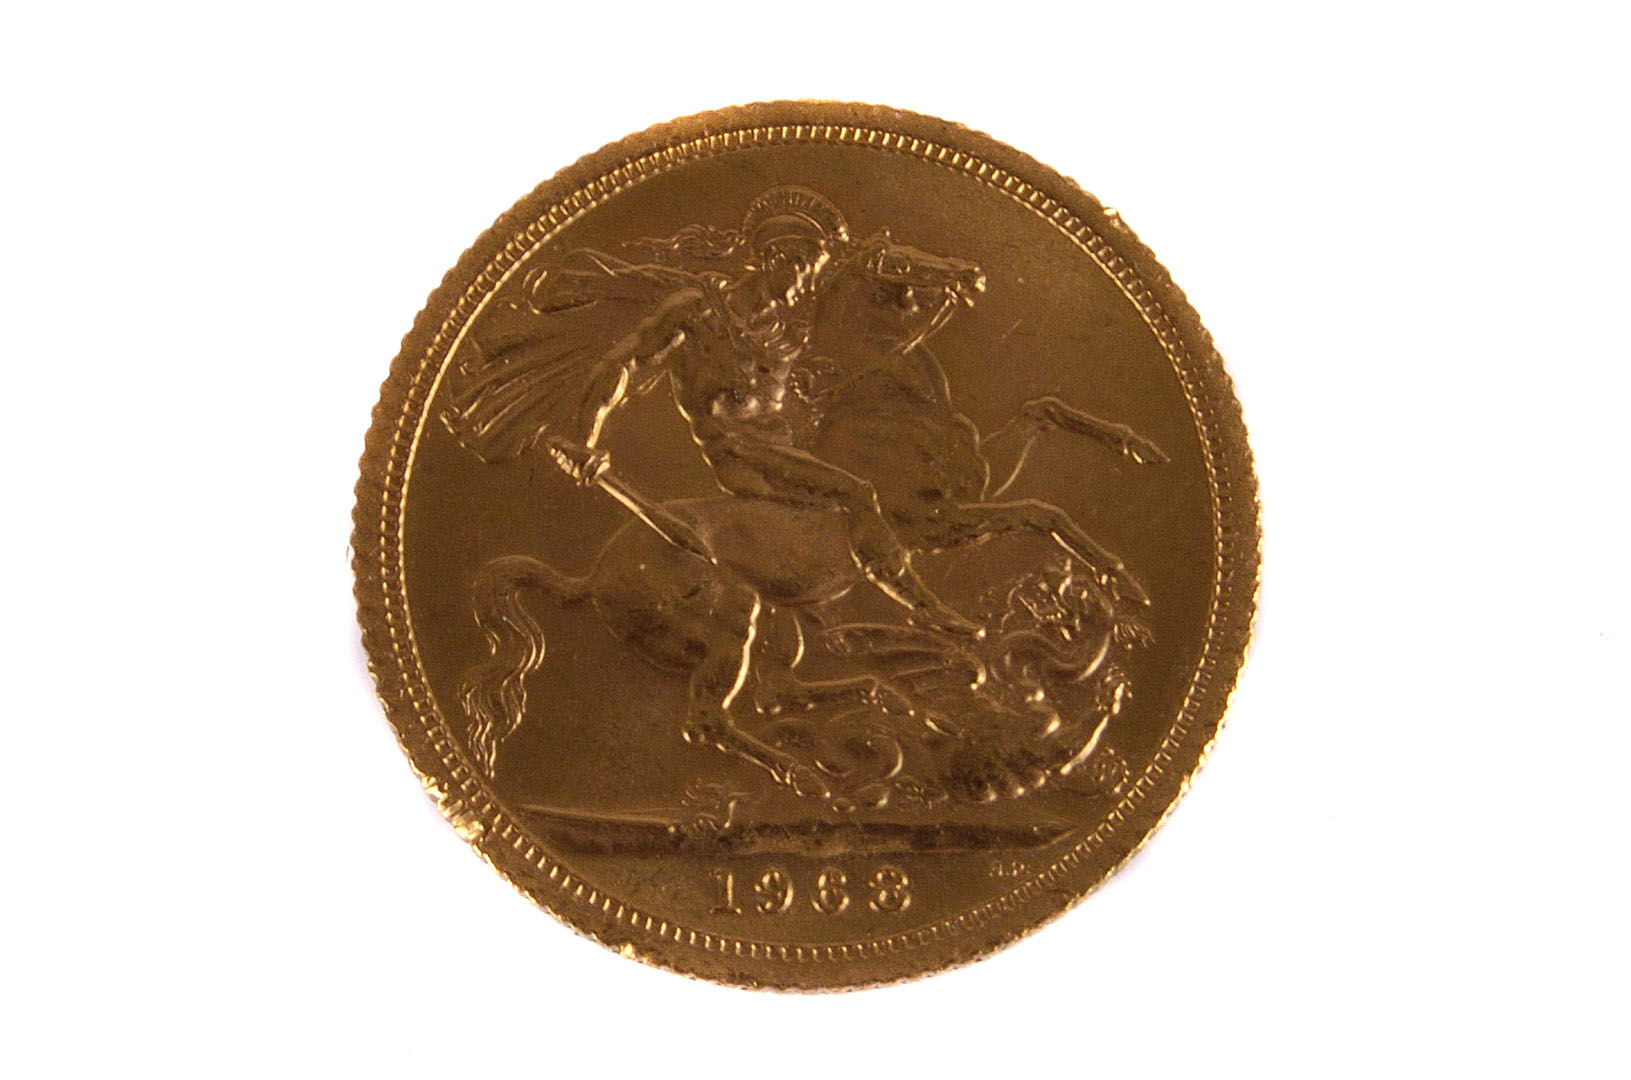 A 1968 gold full sovereign